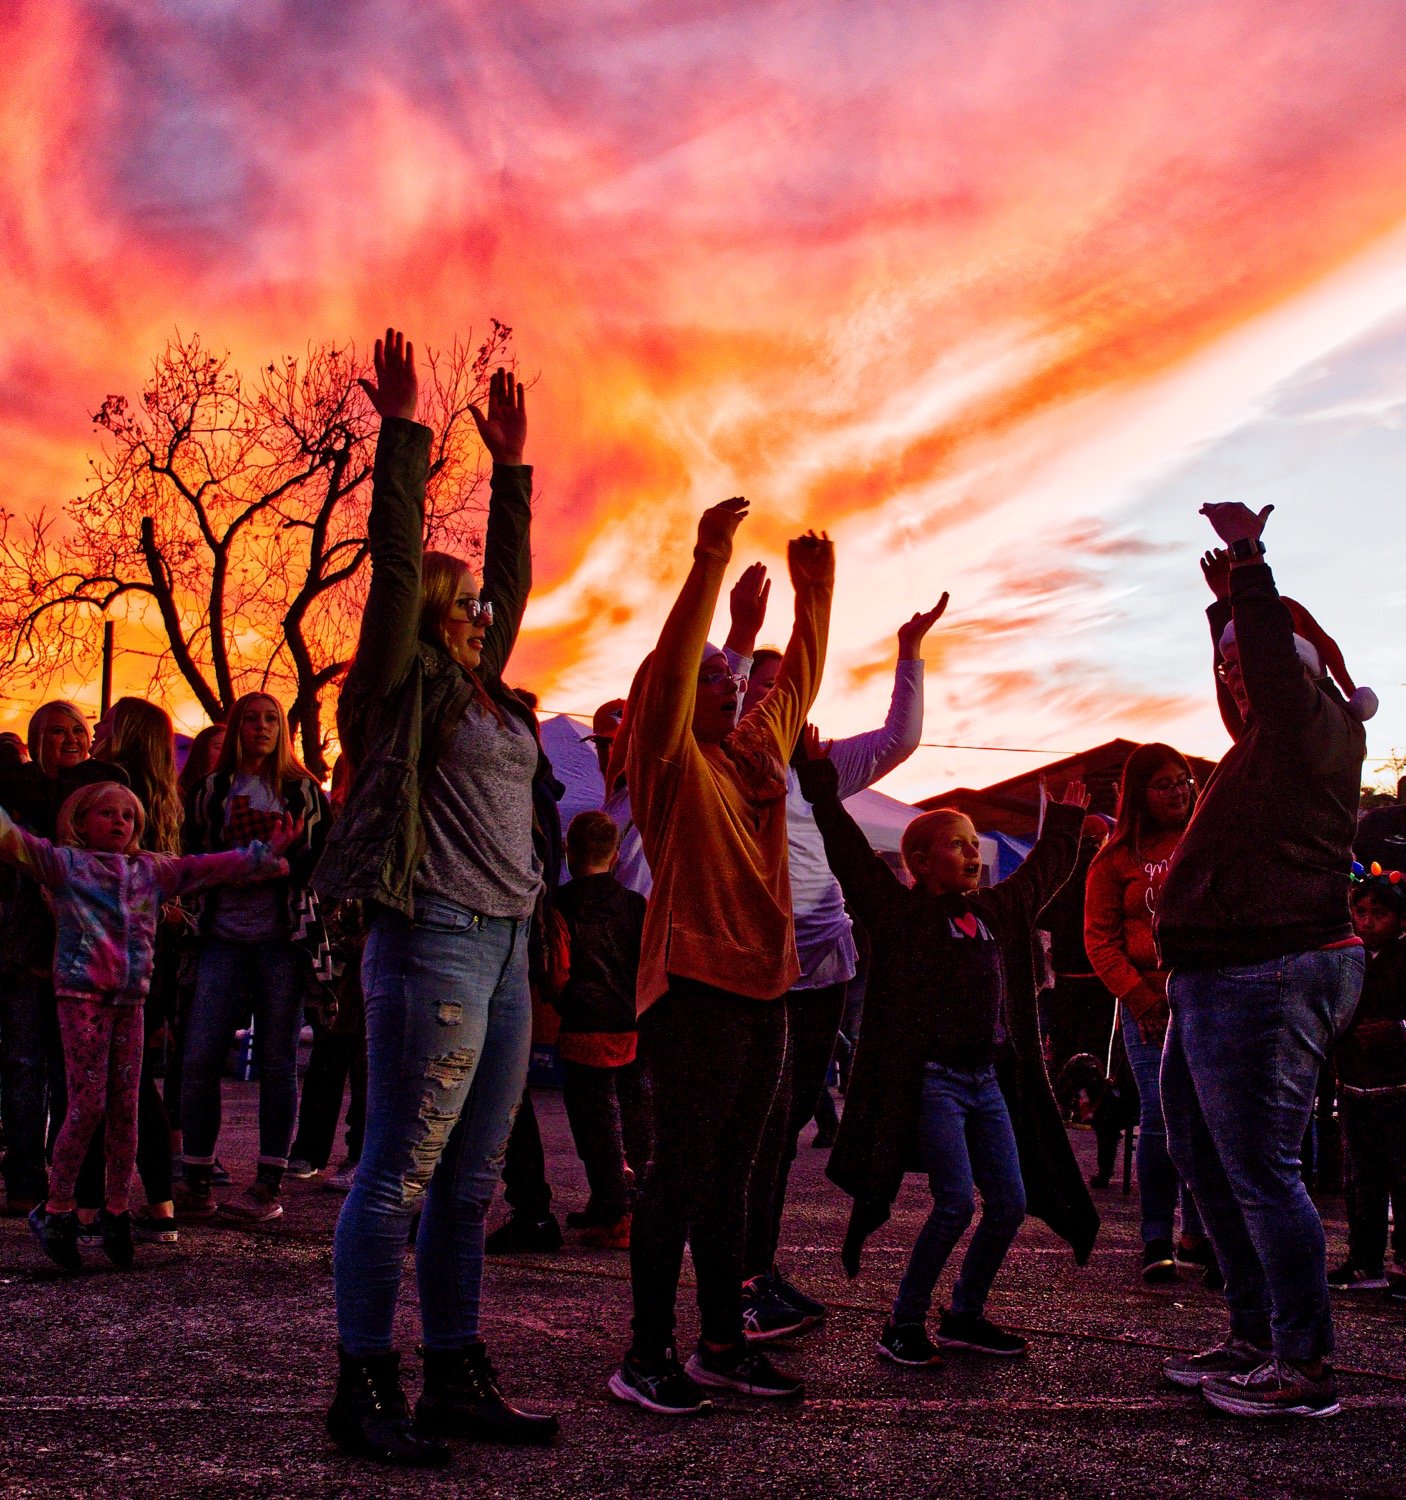 Between upbeat renditions of popular holiday tunes, the Village People's YMCA was a dance everyone knew and many joined in on as the sun set over Quitman on Saturday evening. [see more of the festivities]